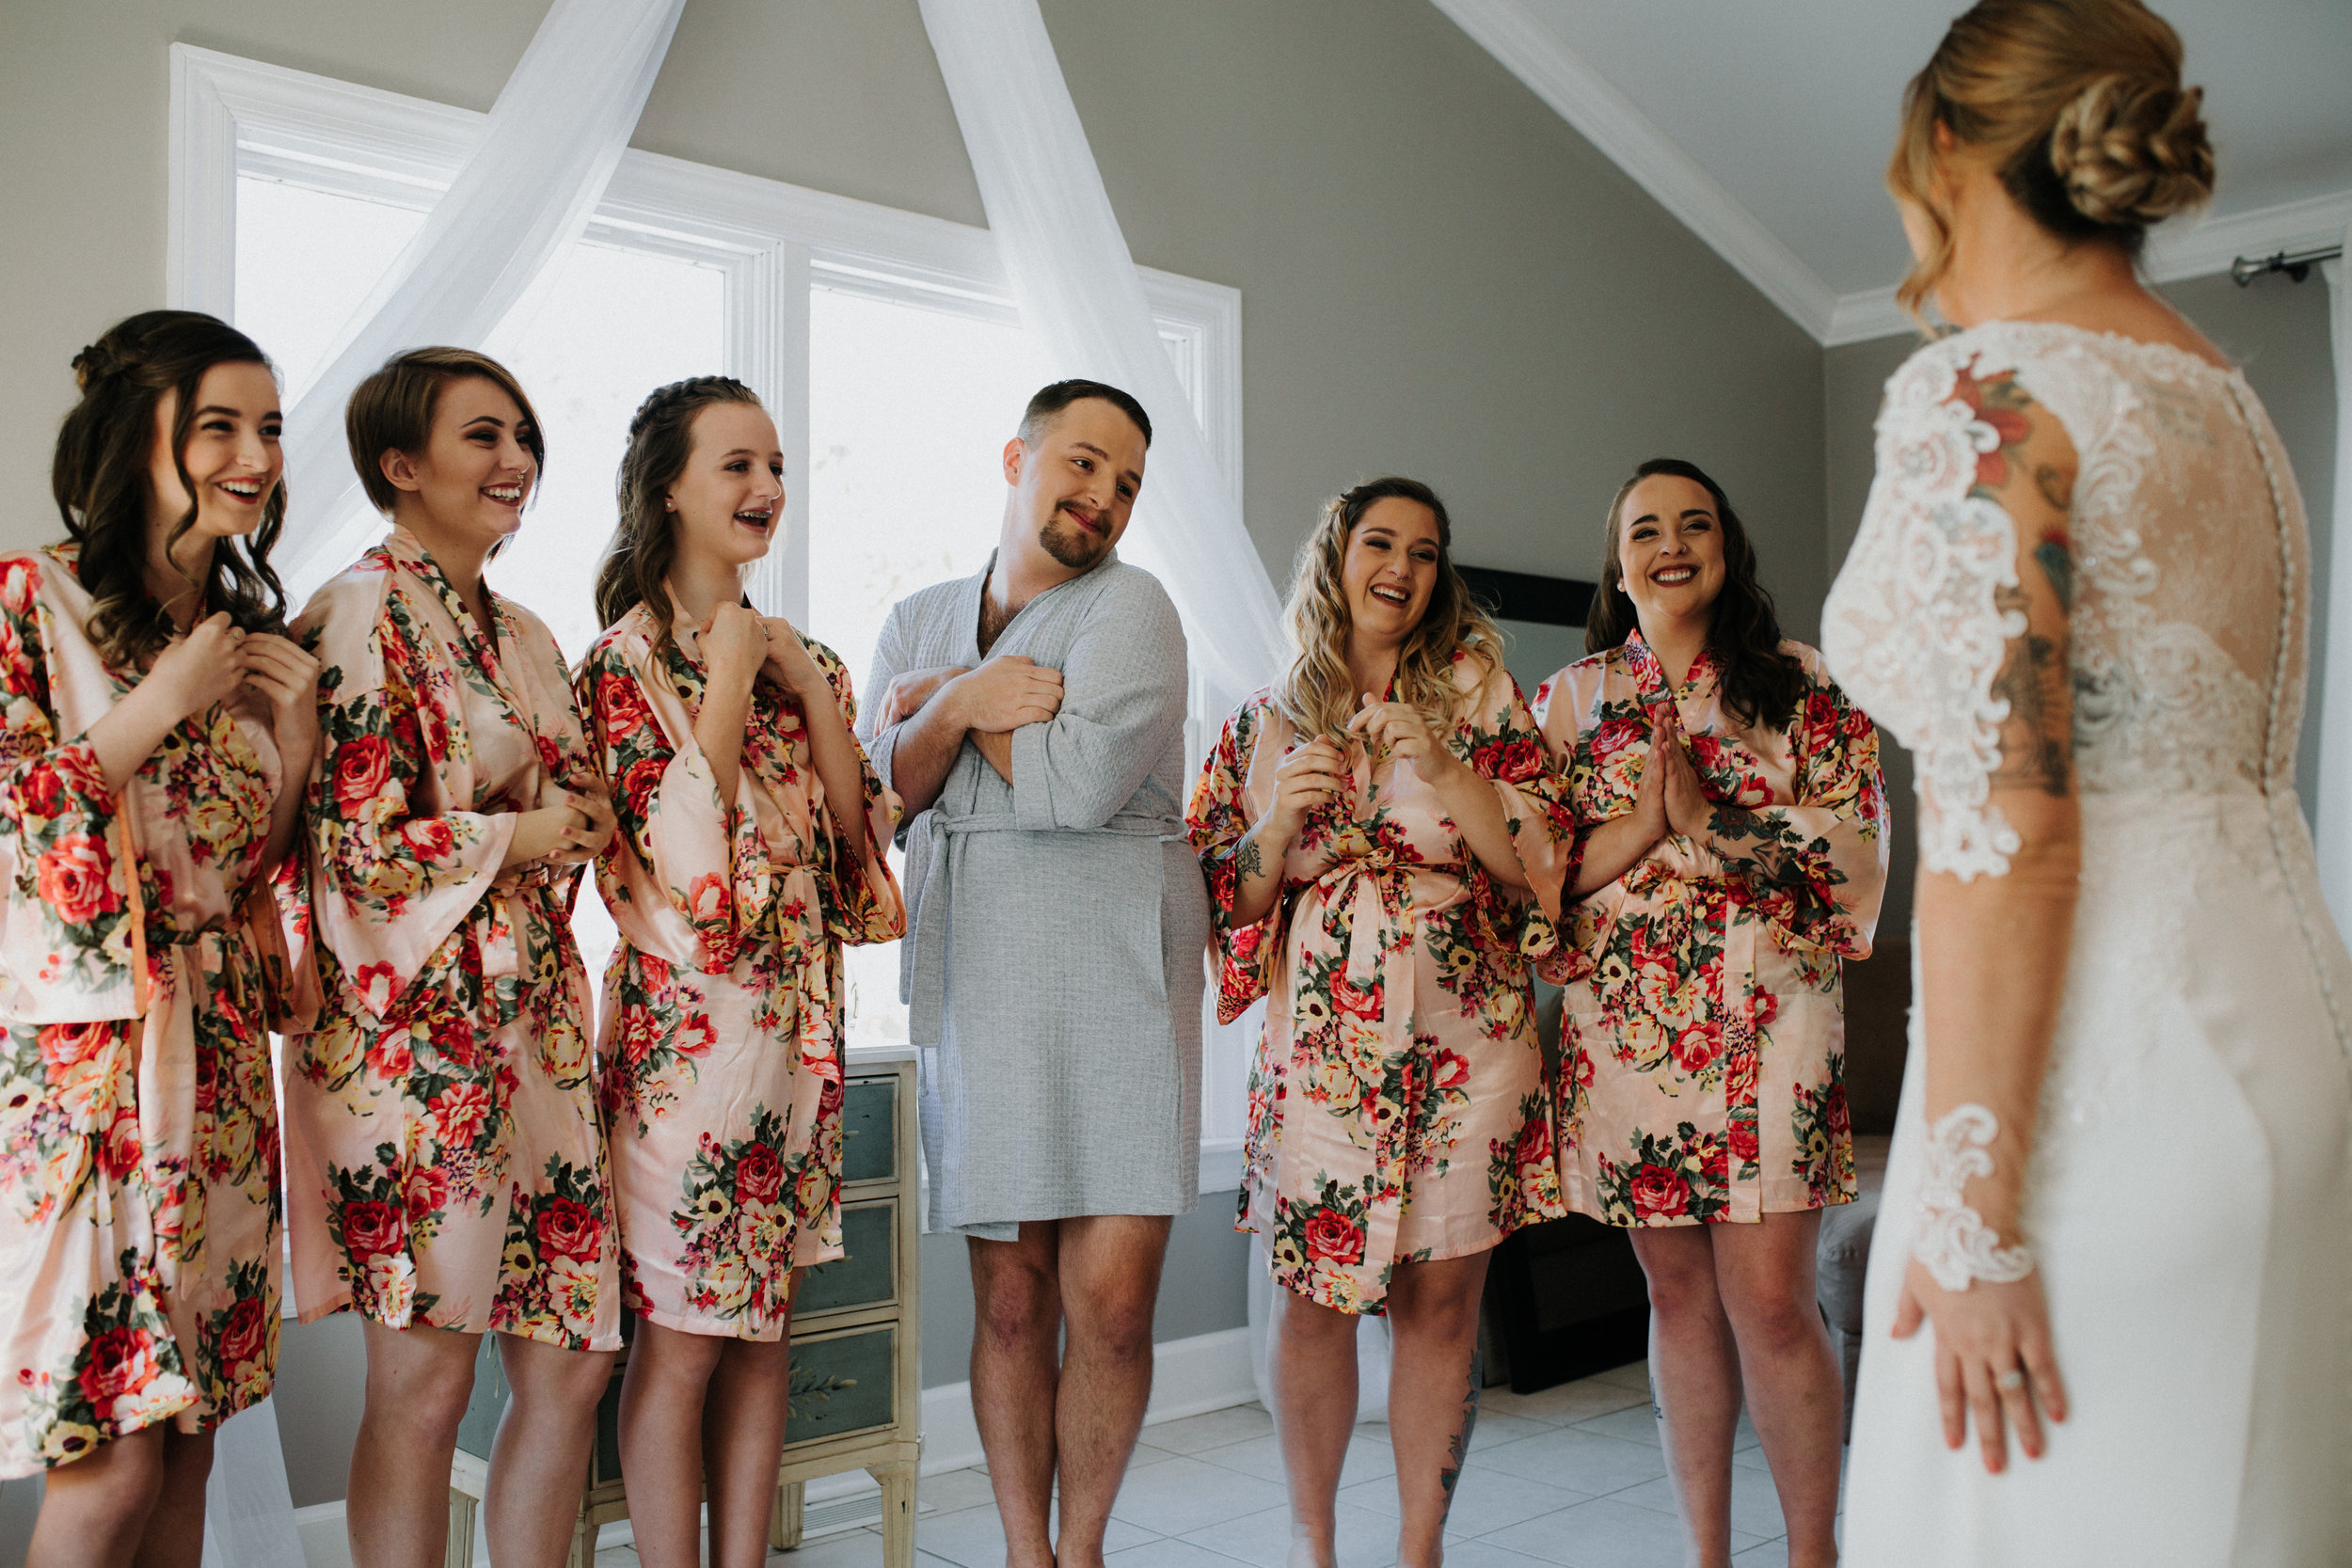 Bridesmaid First Look at Bride - Dara’s Garden Knoxville East Tennessee Wedding — The Overwhelmed Bride Wedding Blog